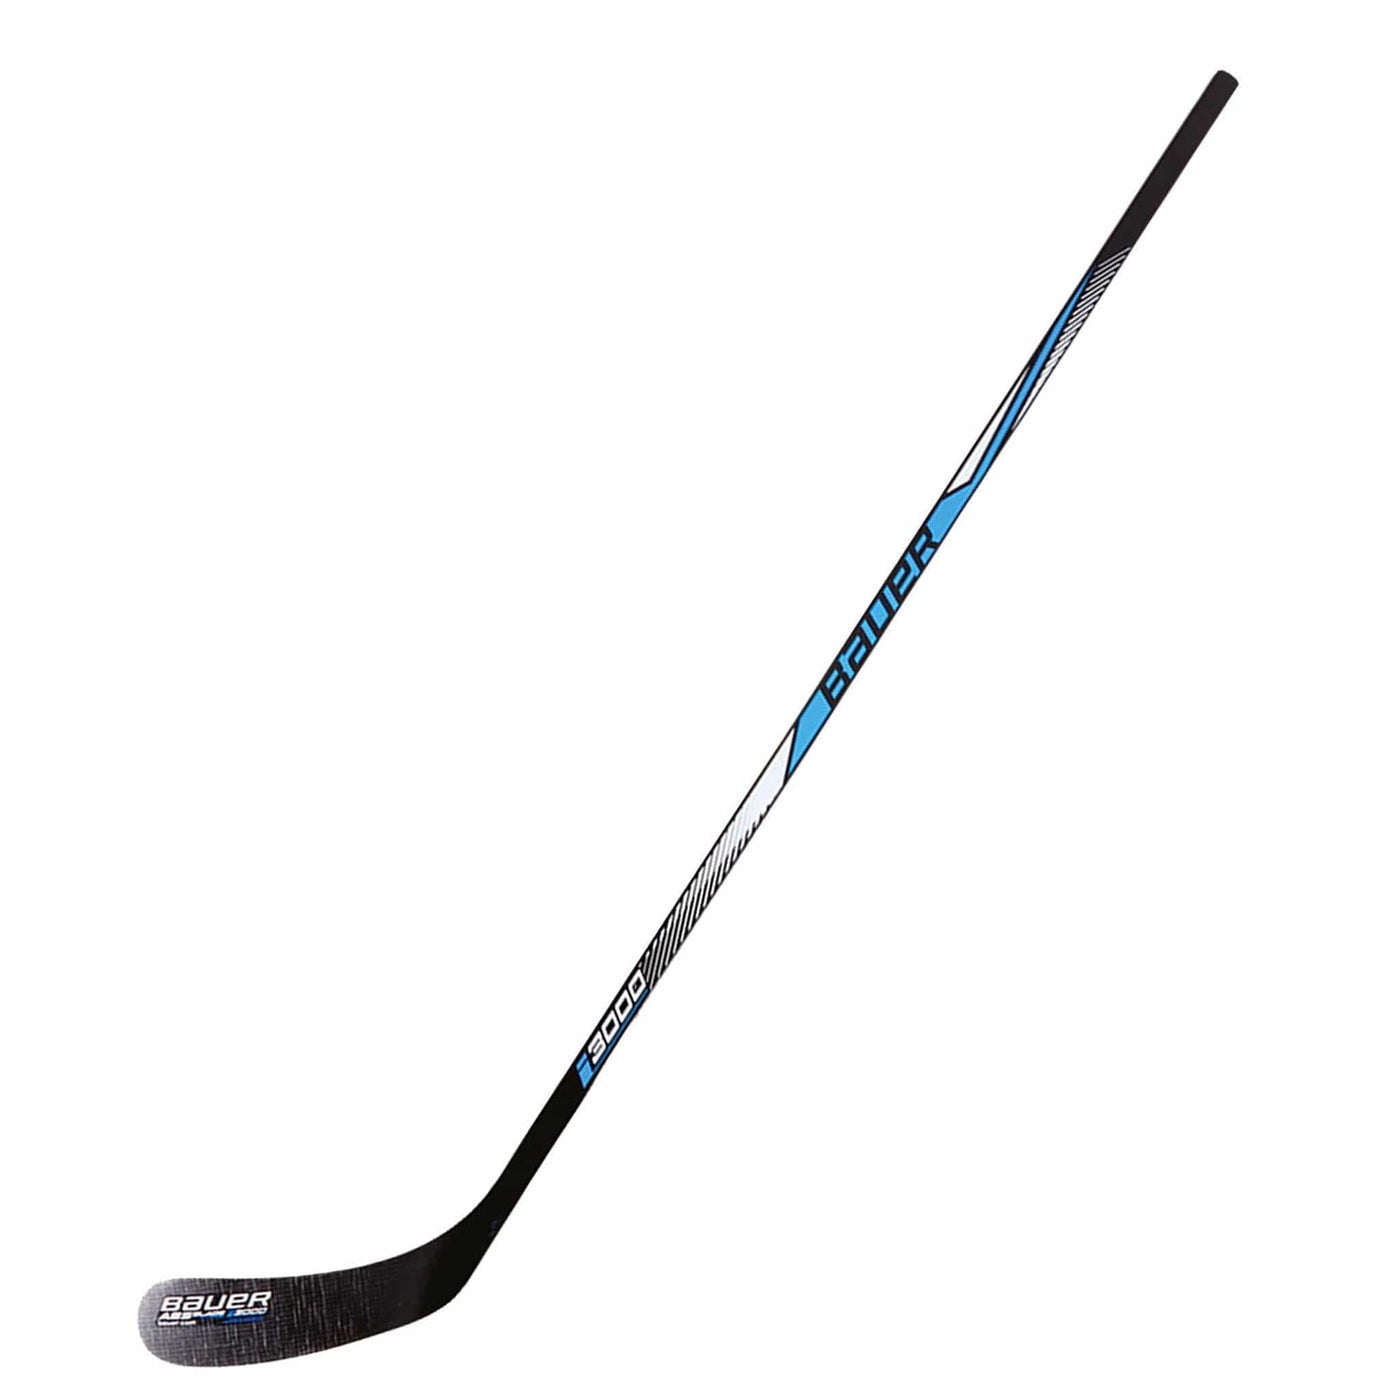 Bauer i3000 ABS Youth Wood Hockey Stick